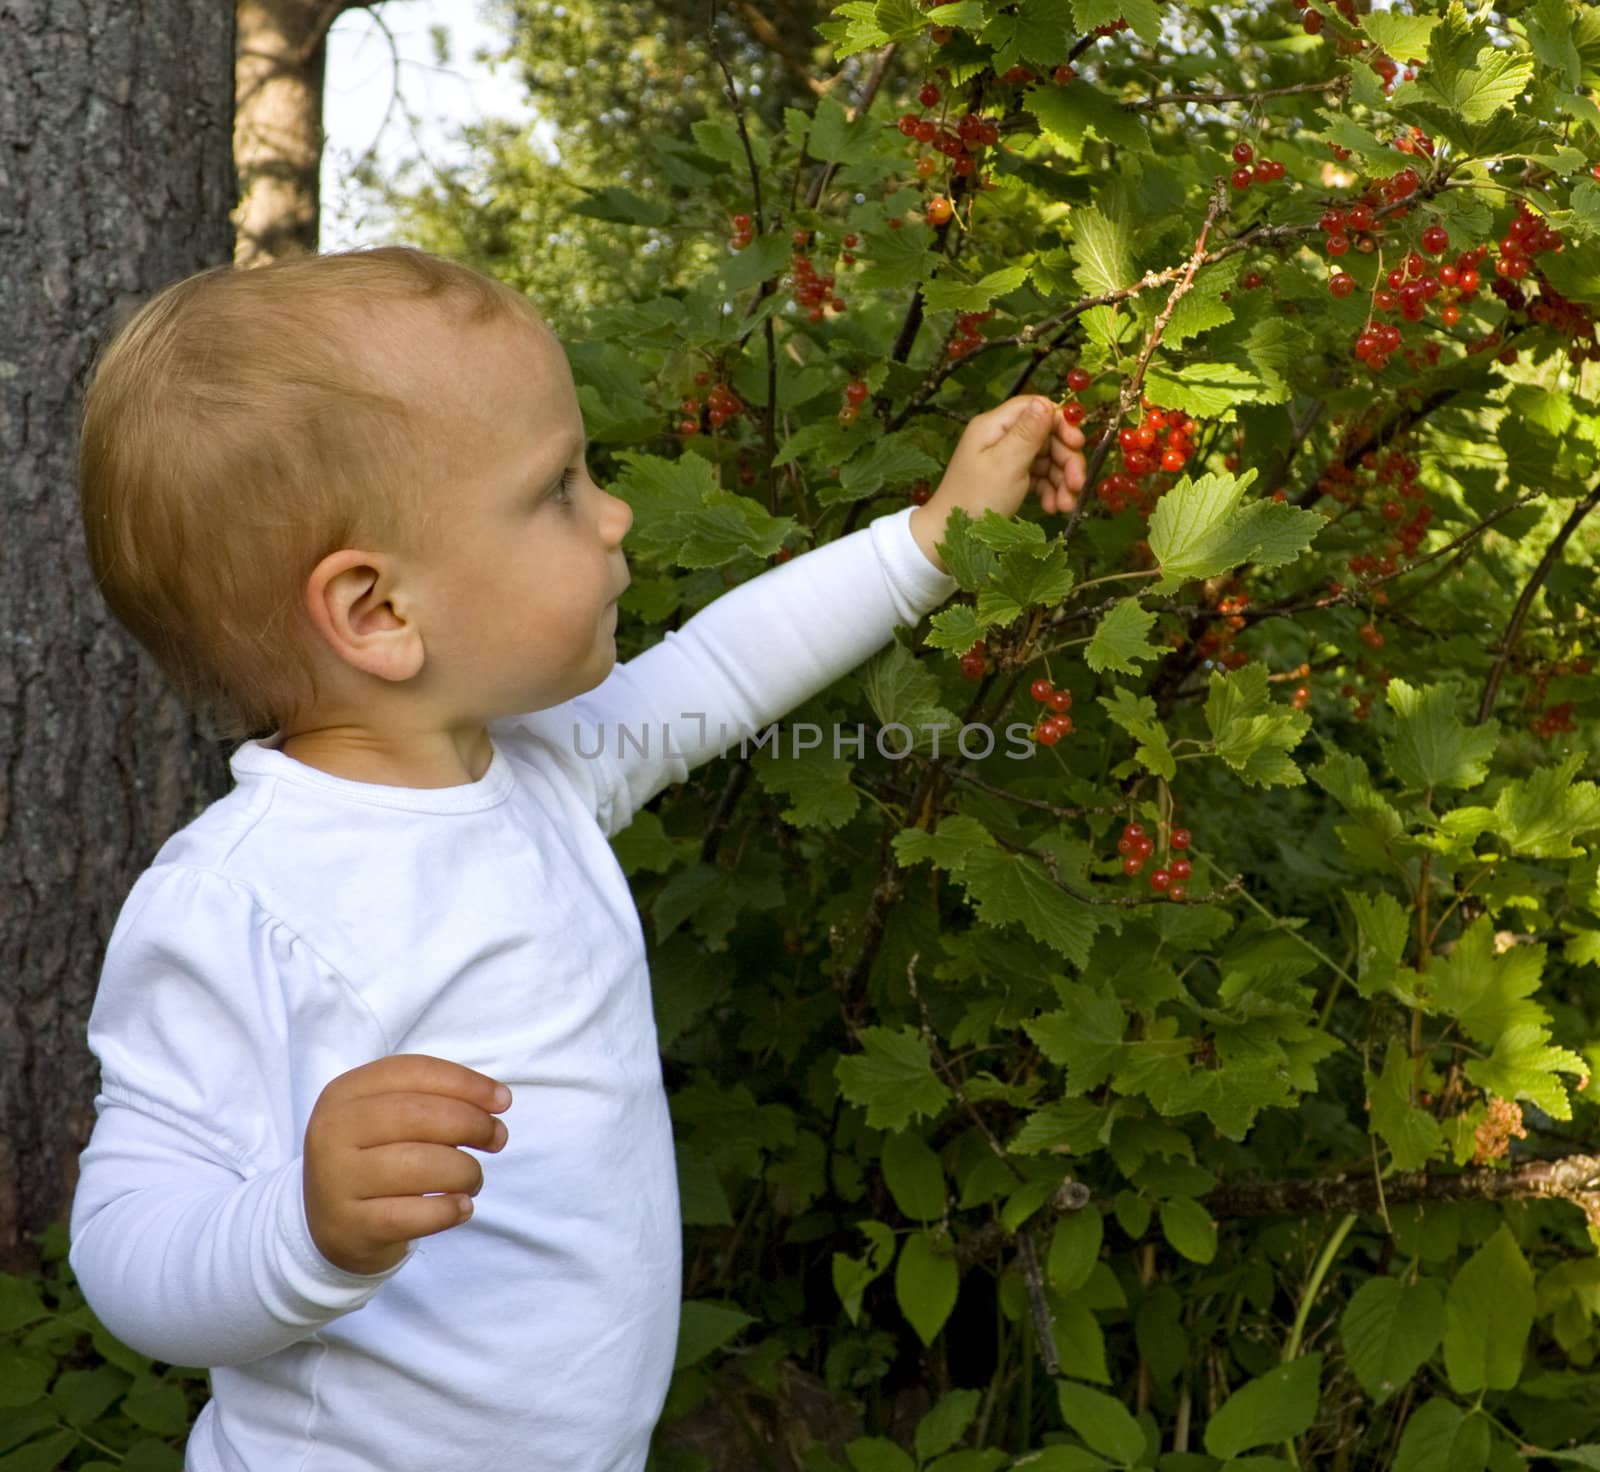 Toddler (one year old) picking redcurrants in a garden